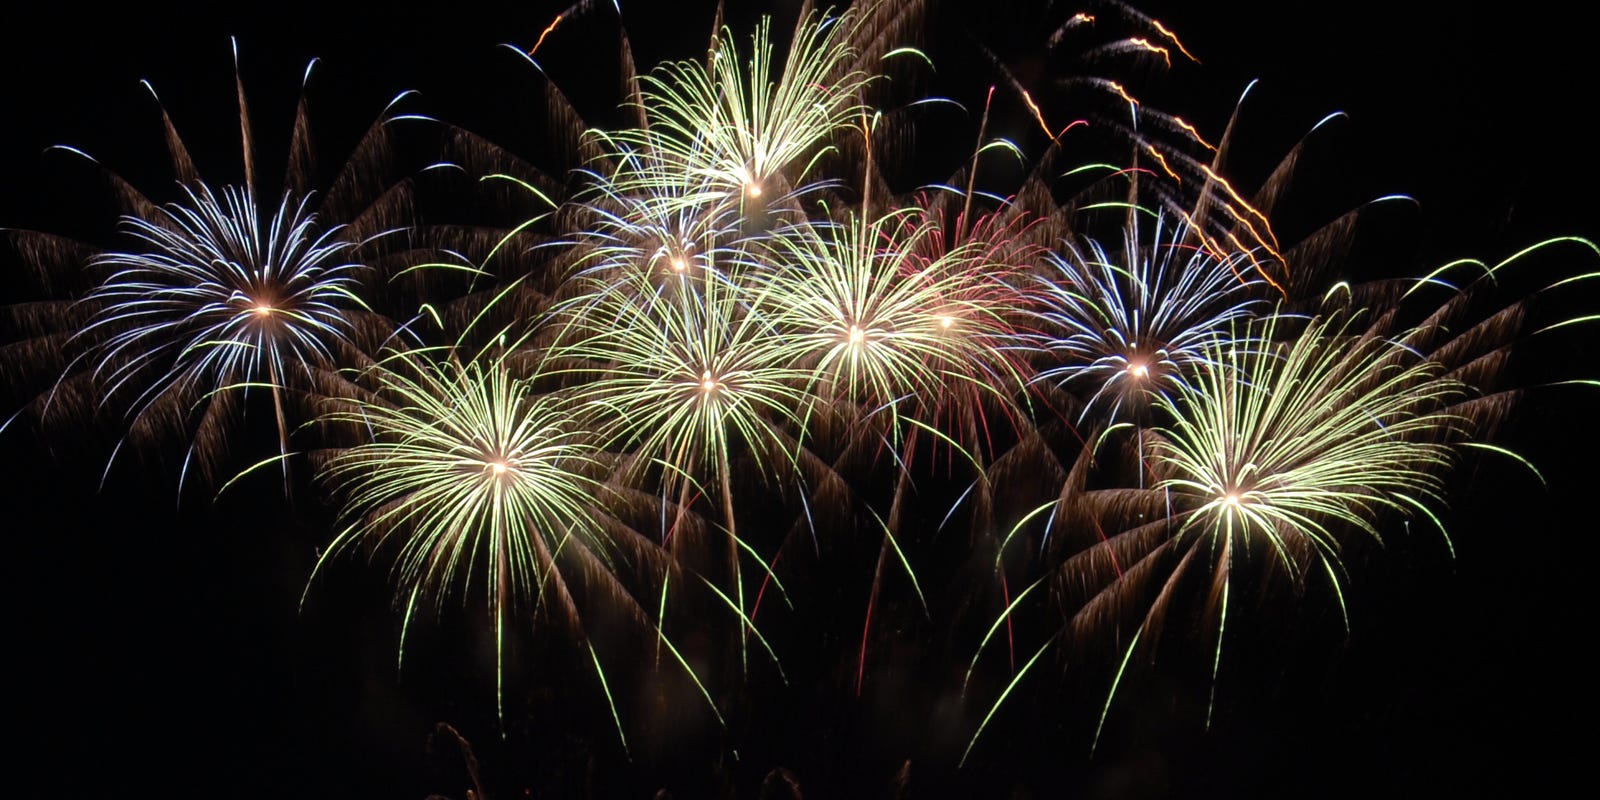 Your 2020 guide to July 4 fireworks displays in the Green Bay area